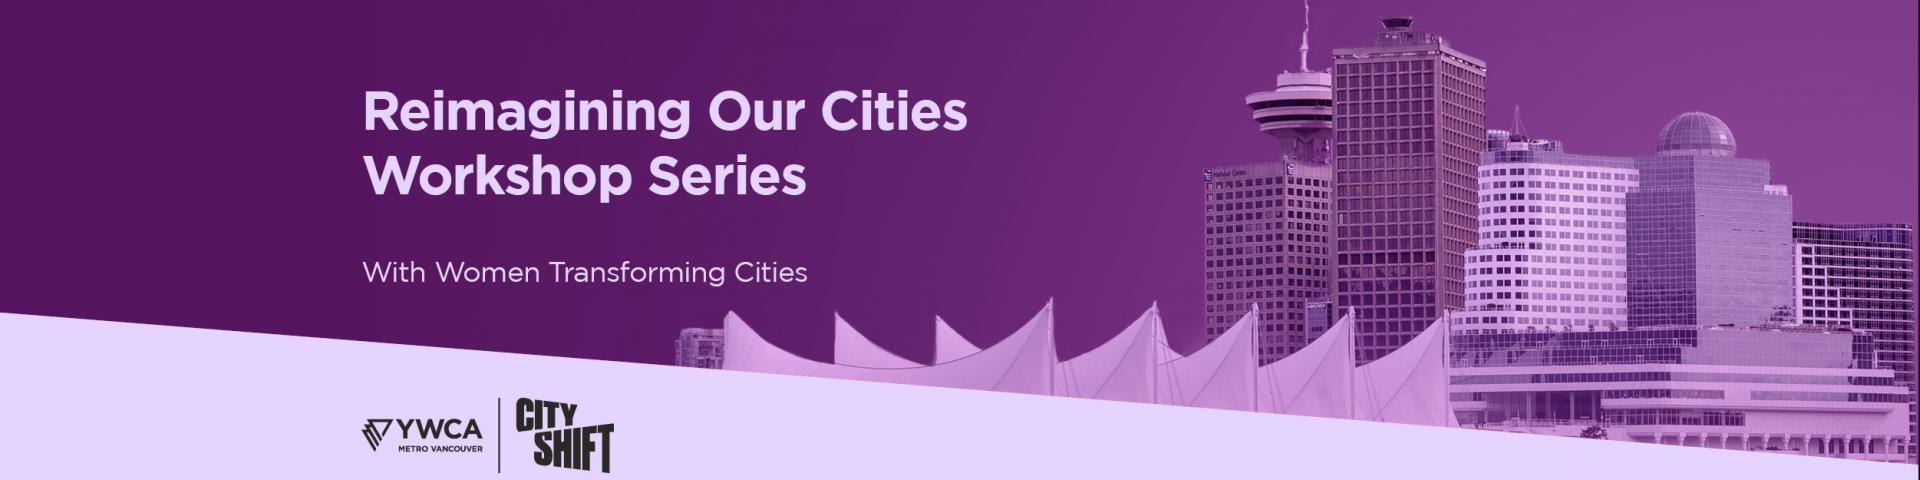 Hero image with purple background and light purple diagonal banner at the bottom. Background graphic of Vancouver's Skyline is on the middle and right hand side. YWCA Metro Vancouver and YWCA City Shift logo is at the bottom left. Text on the left hand side reads" "Reimagining Our Cities Workshop Series// With Women Transforming Cities"